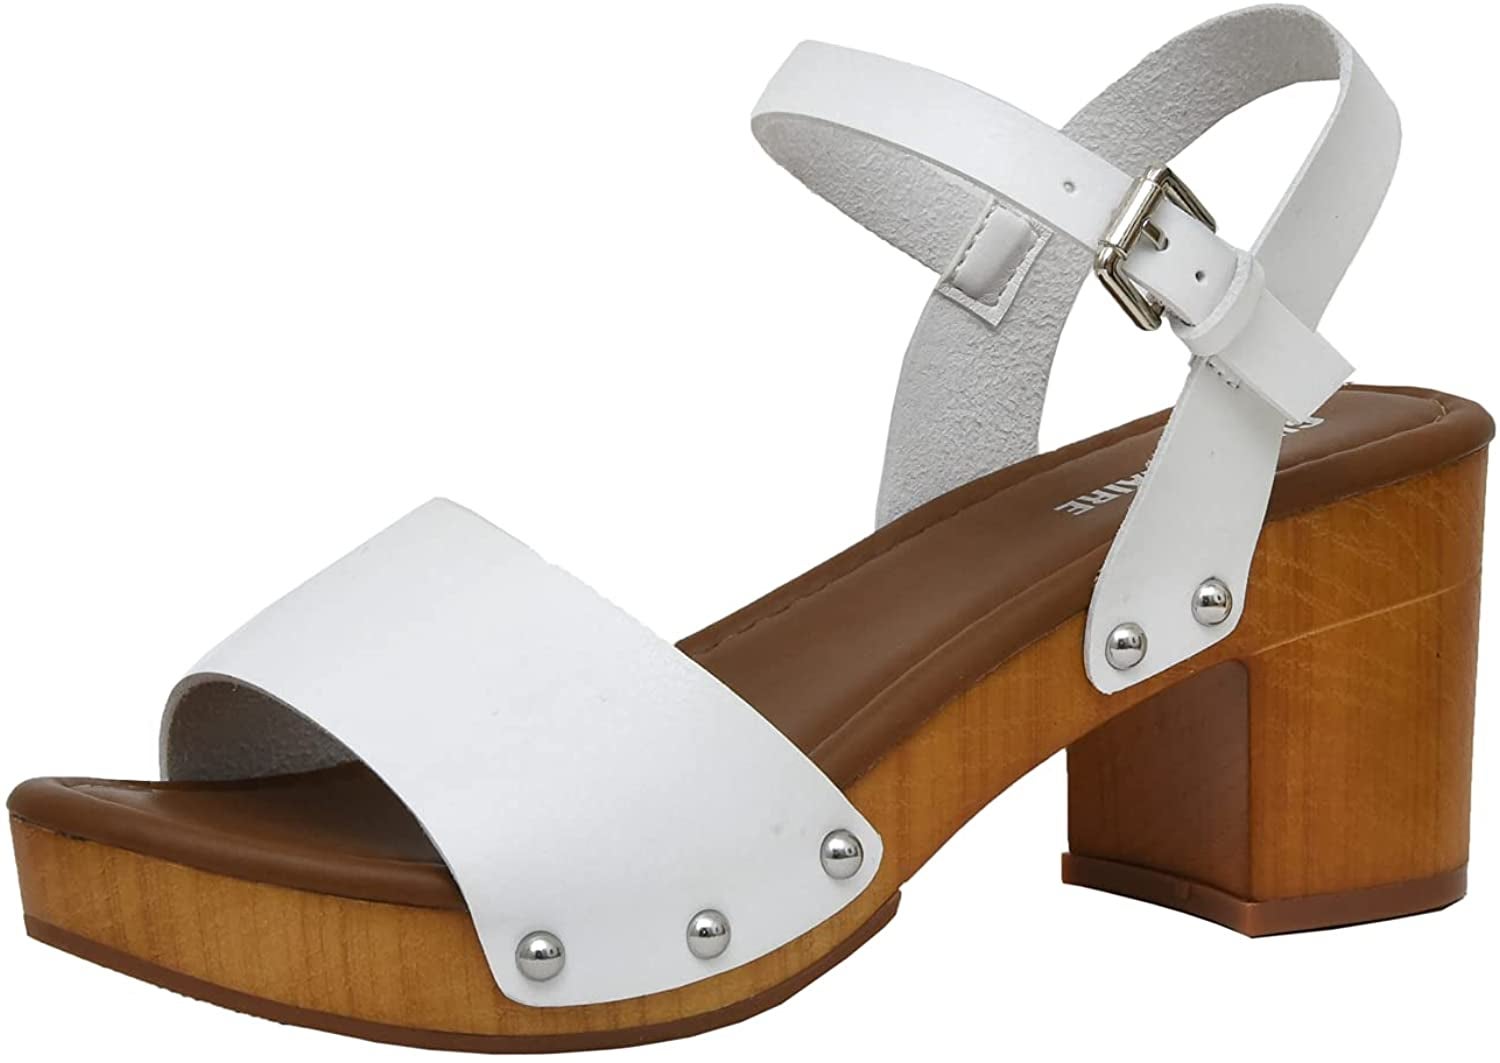 wood soled sandals with white faux leather straps 